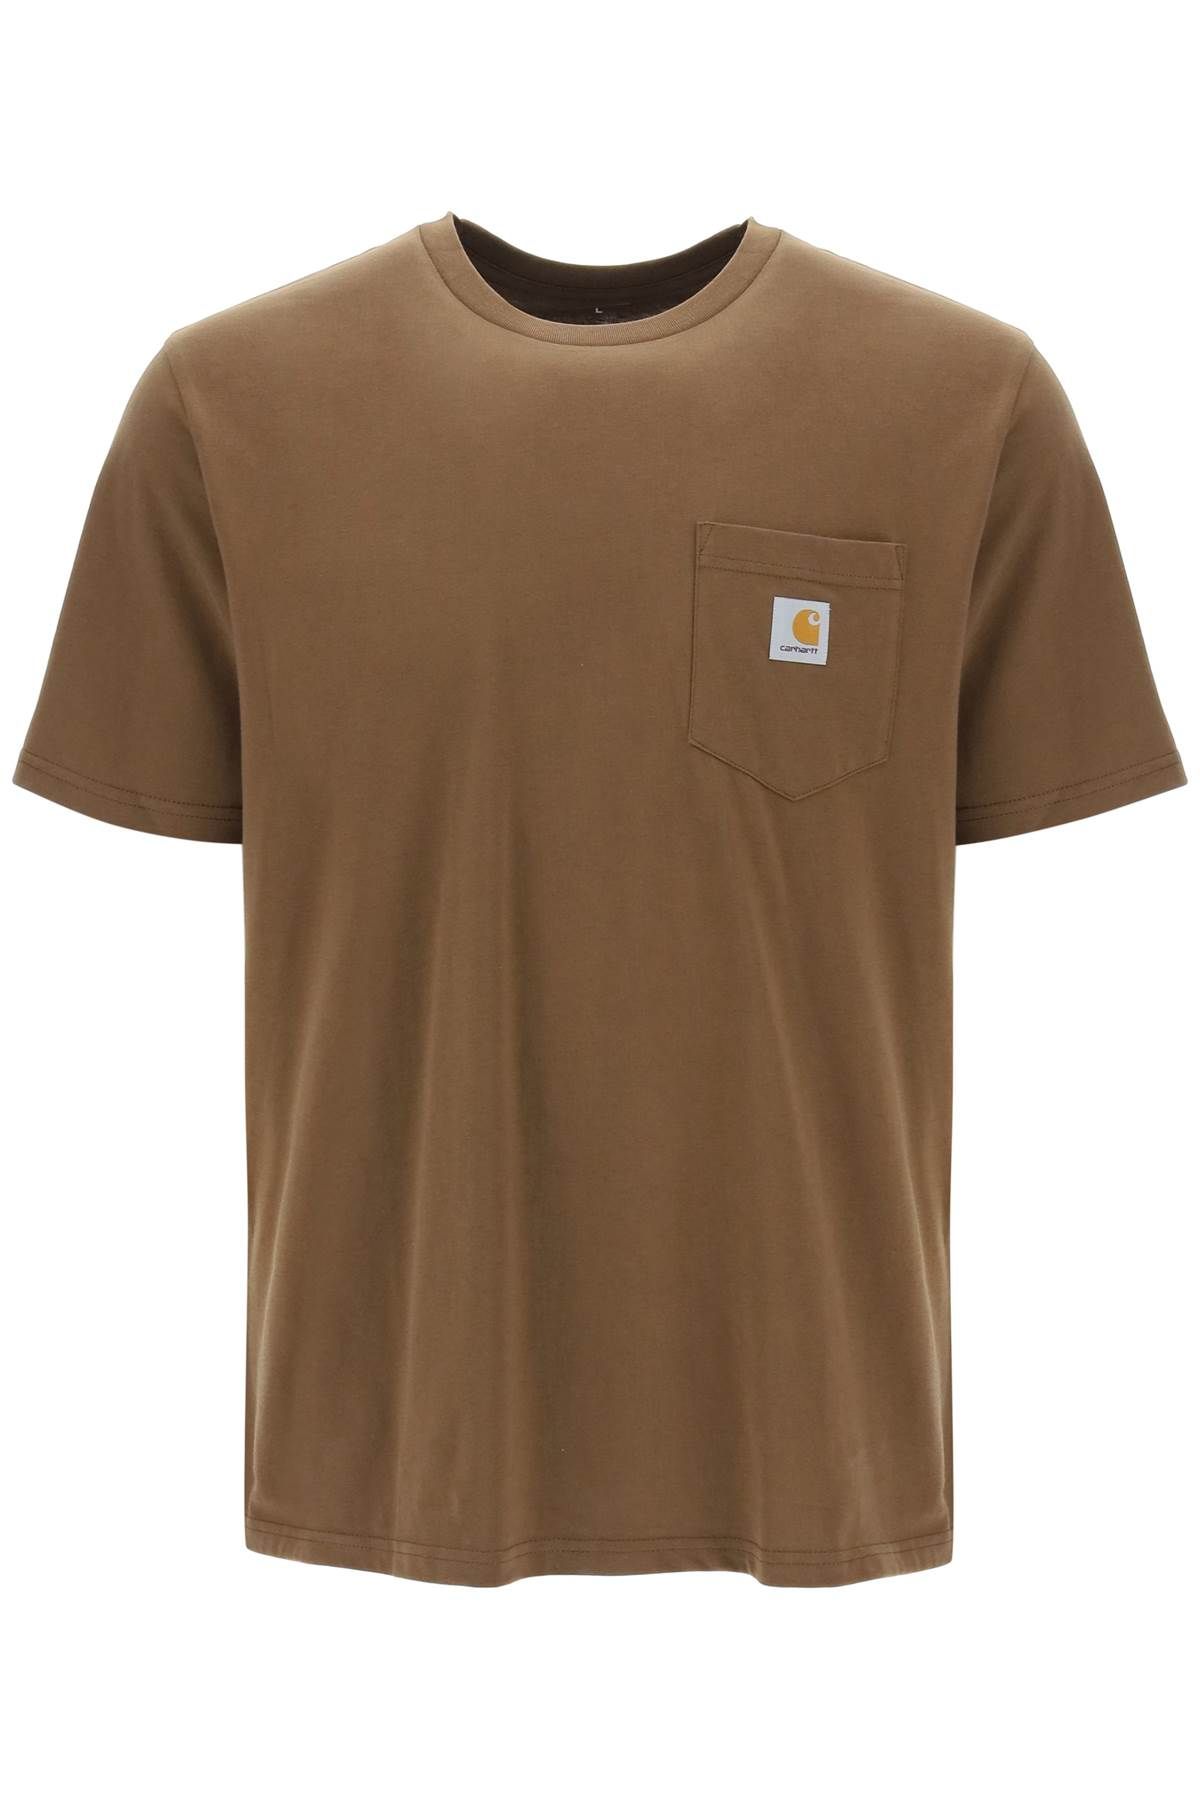 CARHARTT T-SHIRT WITH CHEST POCKET